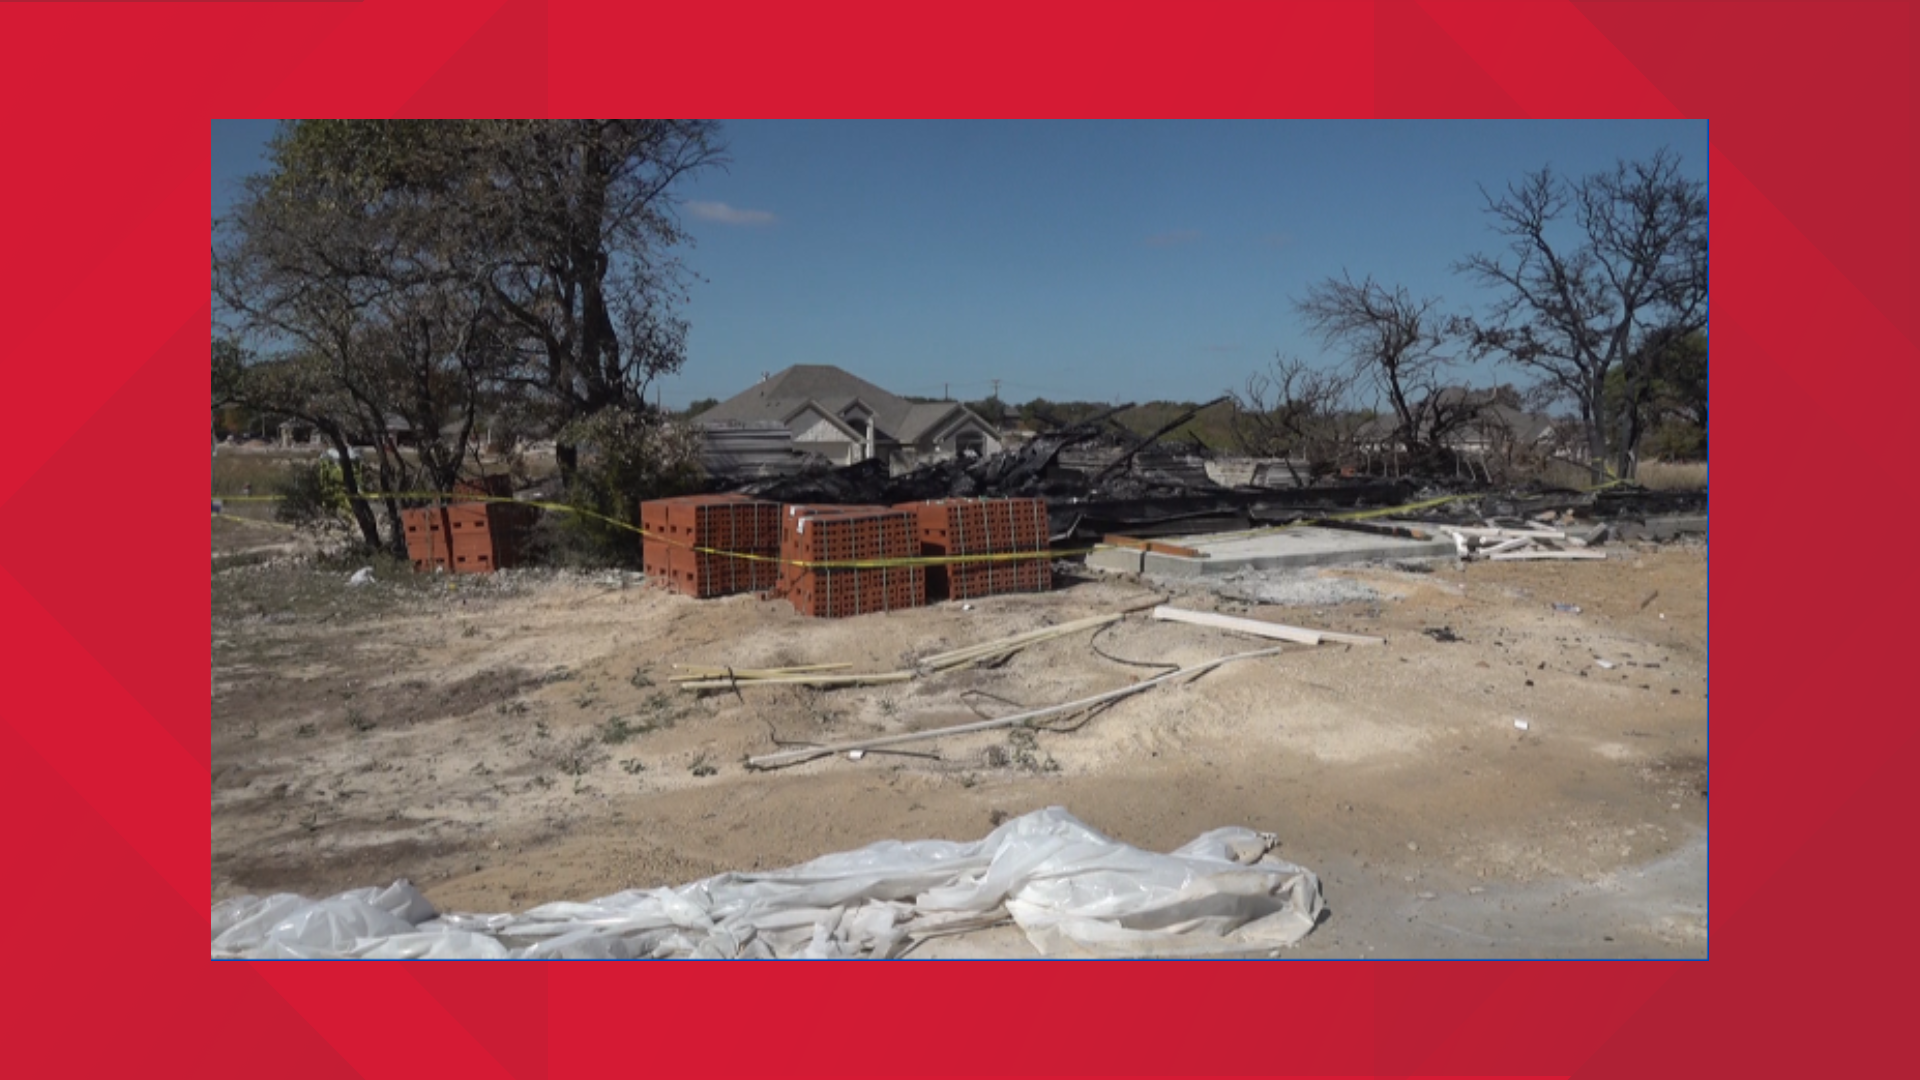 Partially constructed homes have been going up in flames in two locations near Harker Heights. Do authorities have any leads on what’s going on?